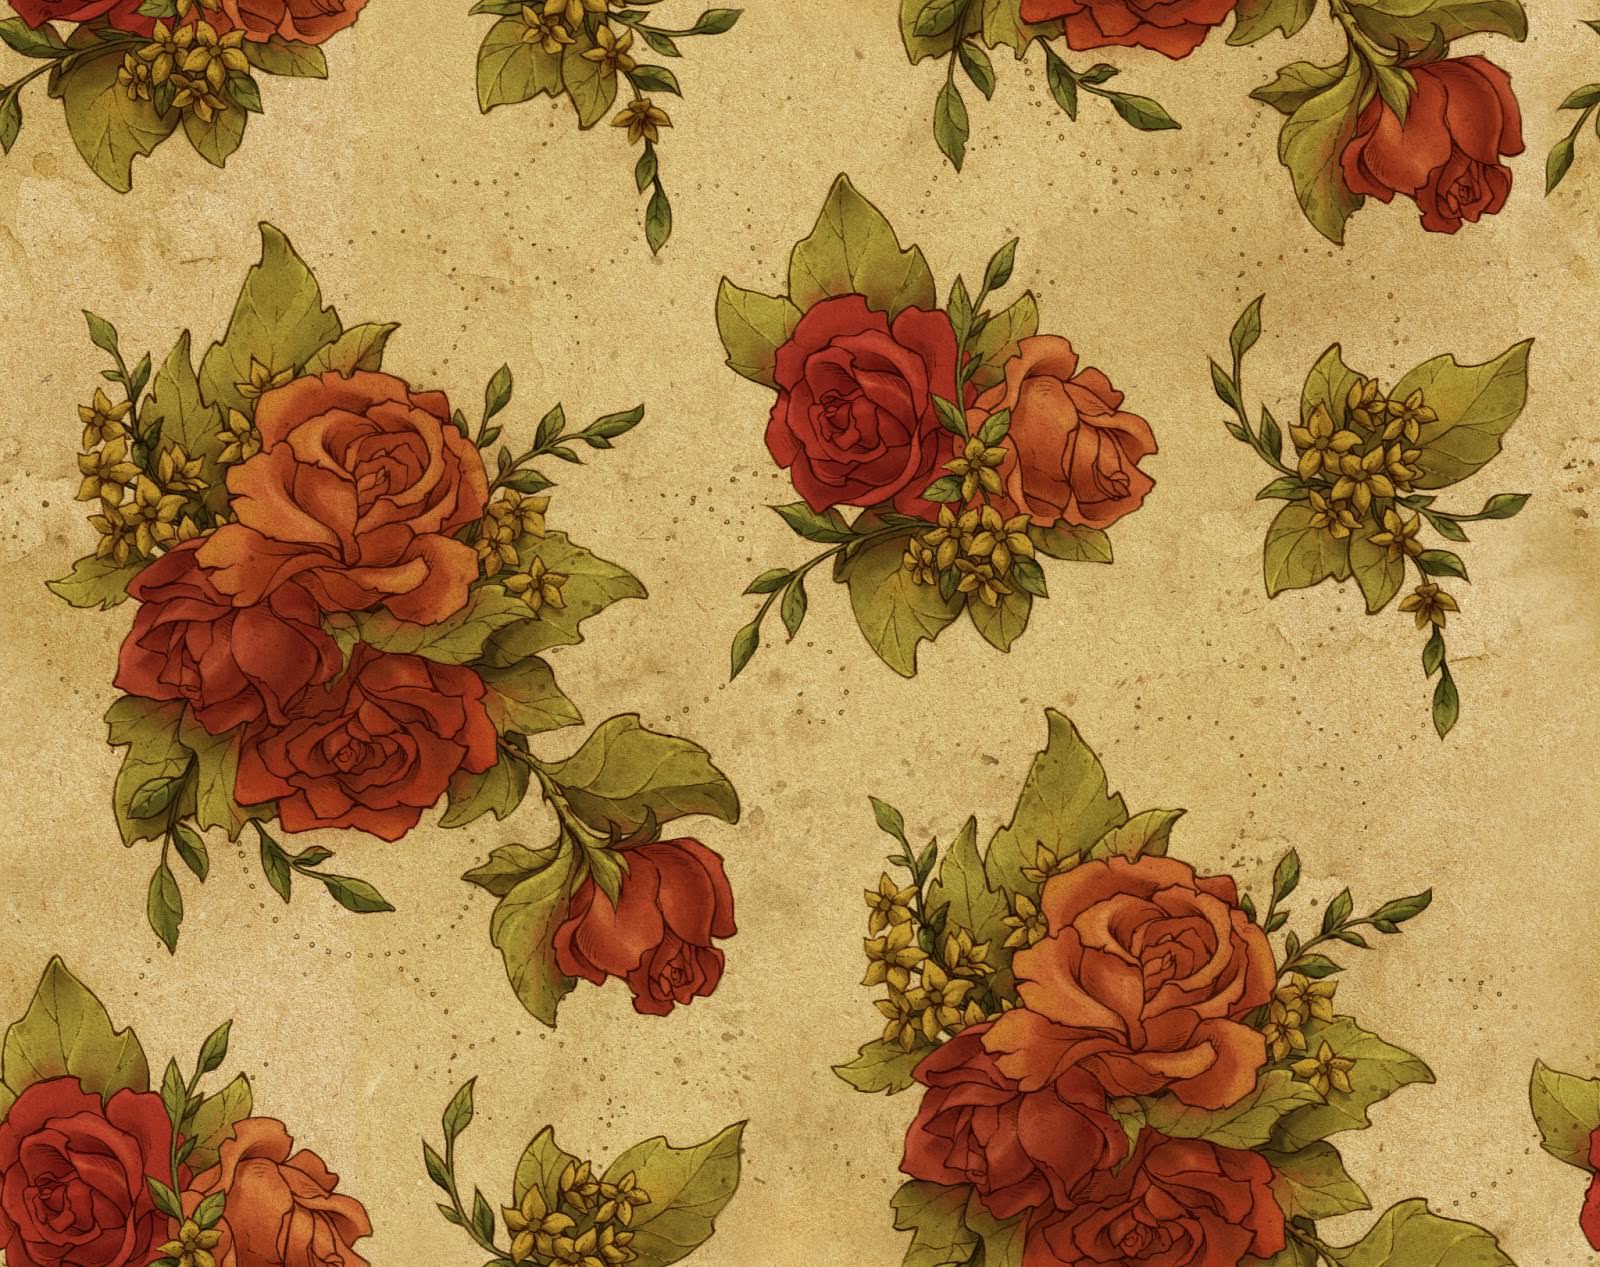 FREE 15+ Floral Vintage Wallpapers in PSD Vector EPS